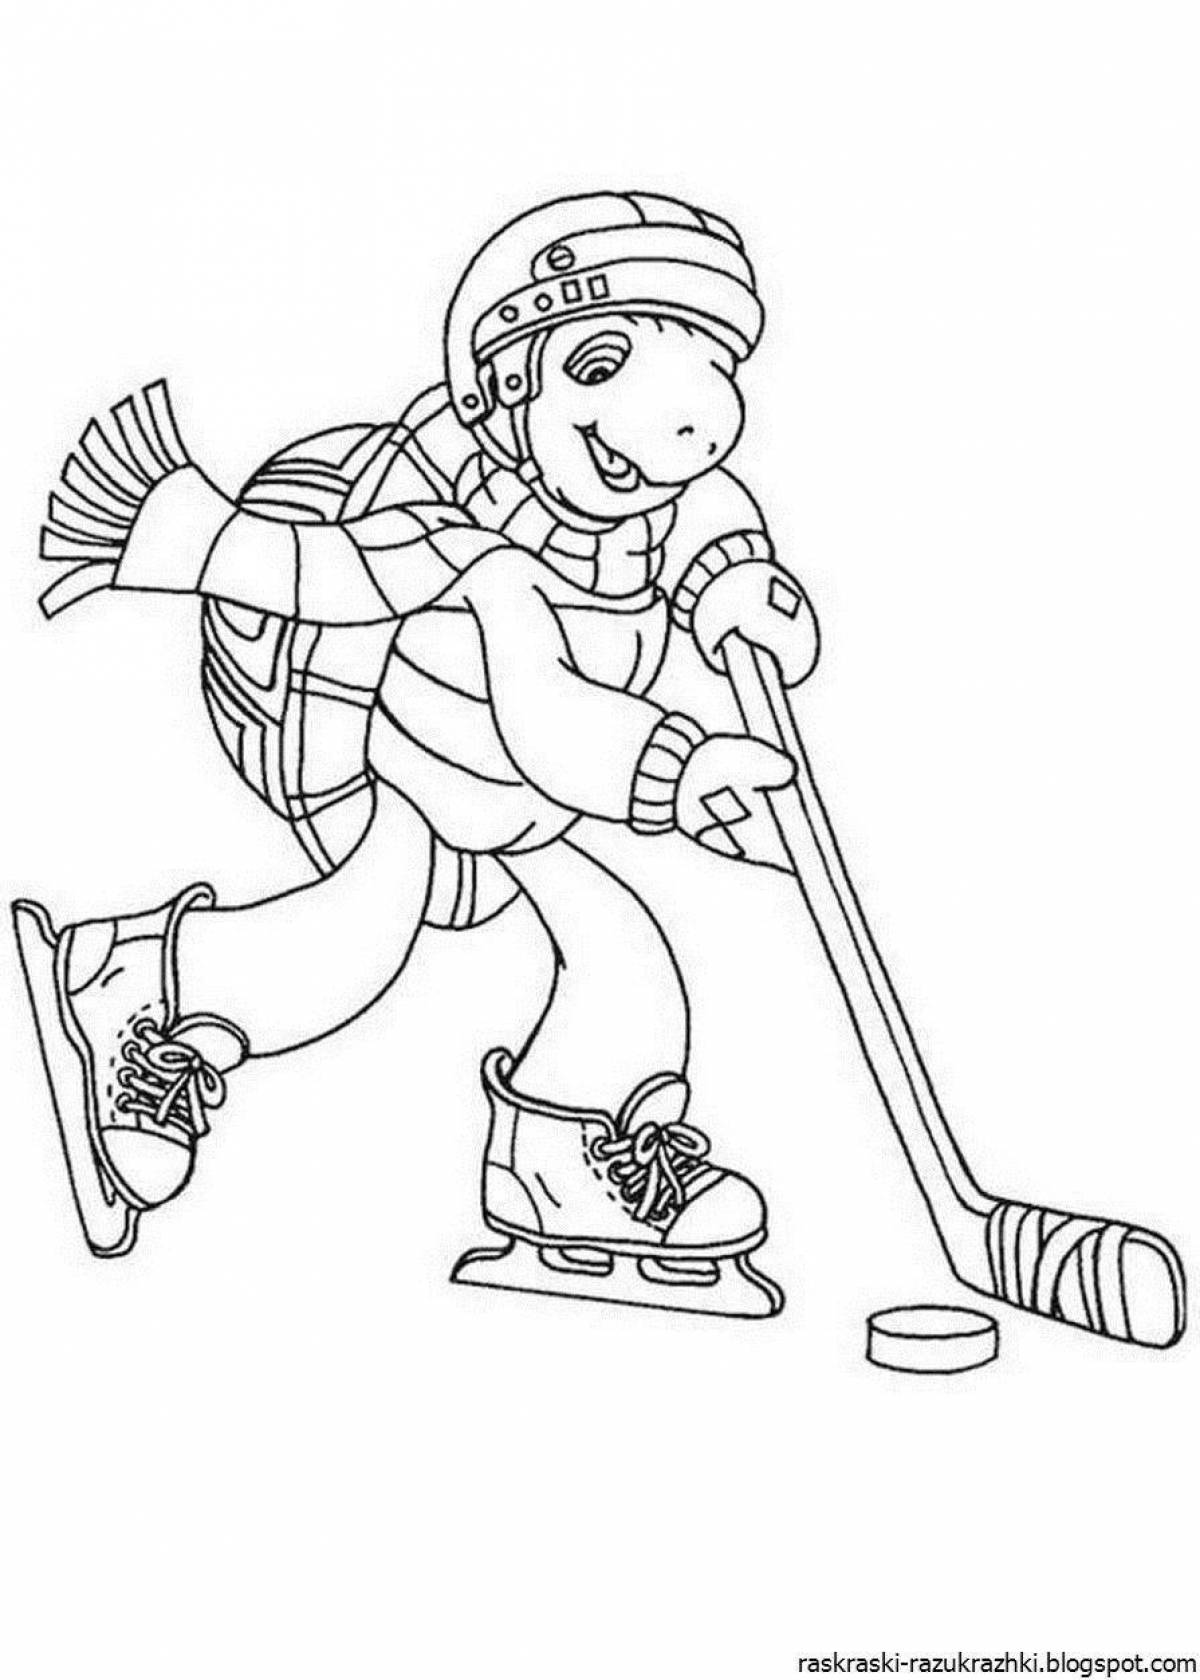 Great winter sports coloring book